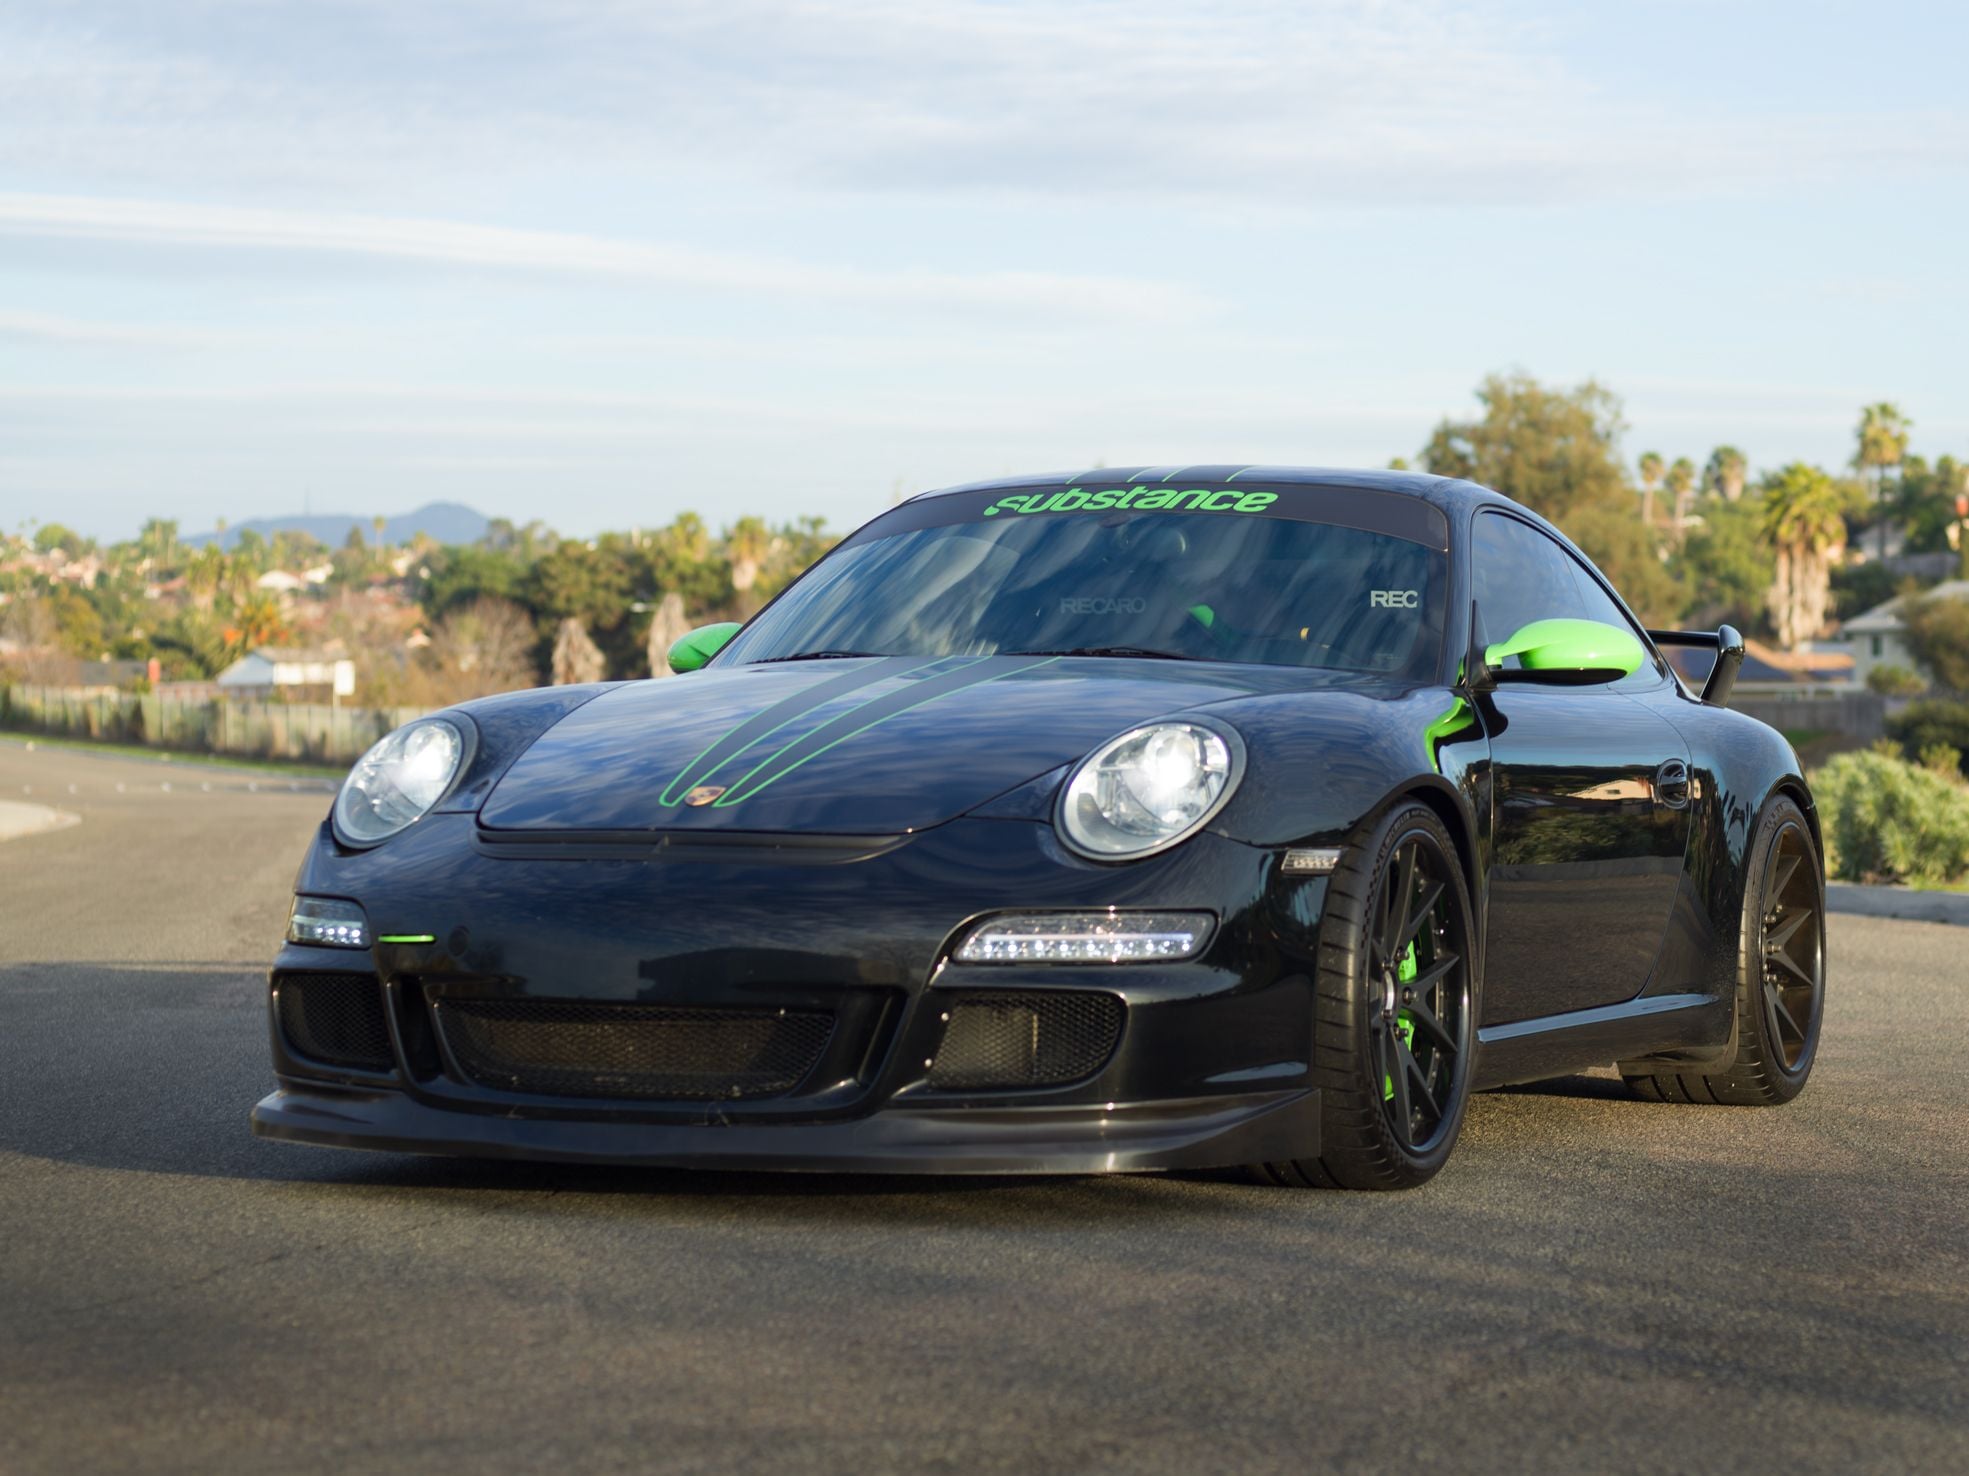 2007 Porsche GT3 - 997.1 911 GT3 with Cup Car Parts - Used - VIN WP0AC29907S793193 - 6 cyl - 2WD - Manual - Coupe - Black - Del Mar, CA 92130, United States